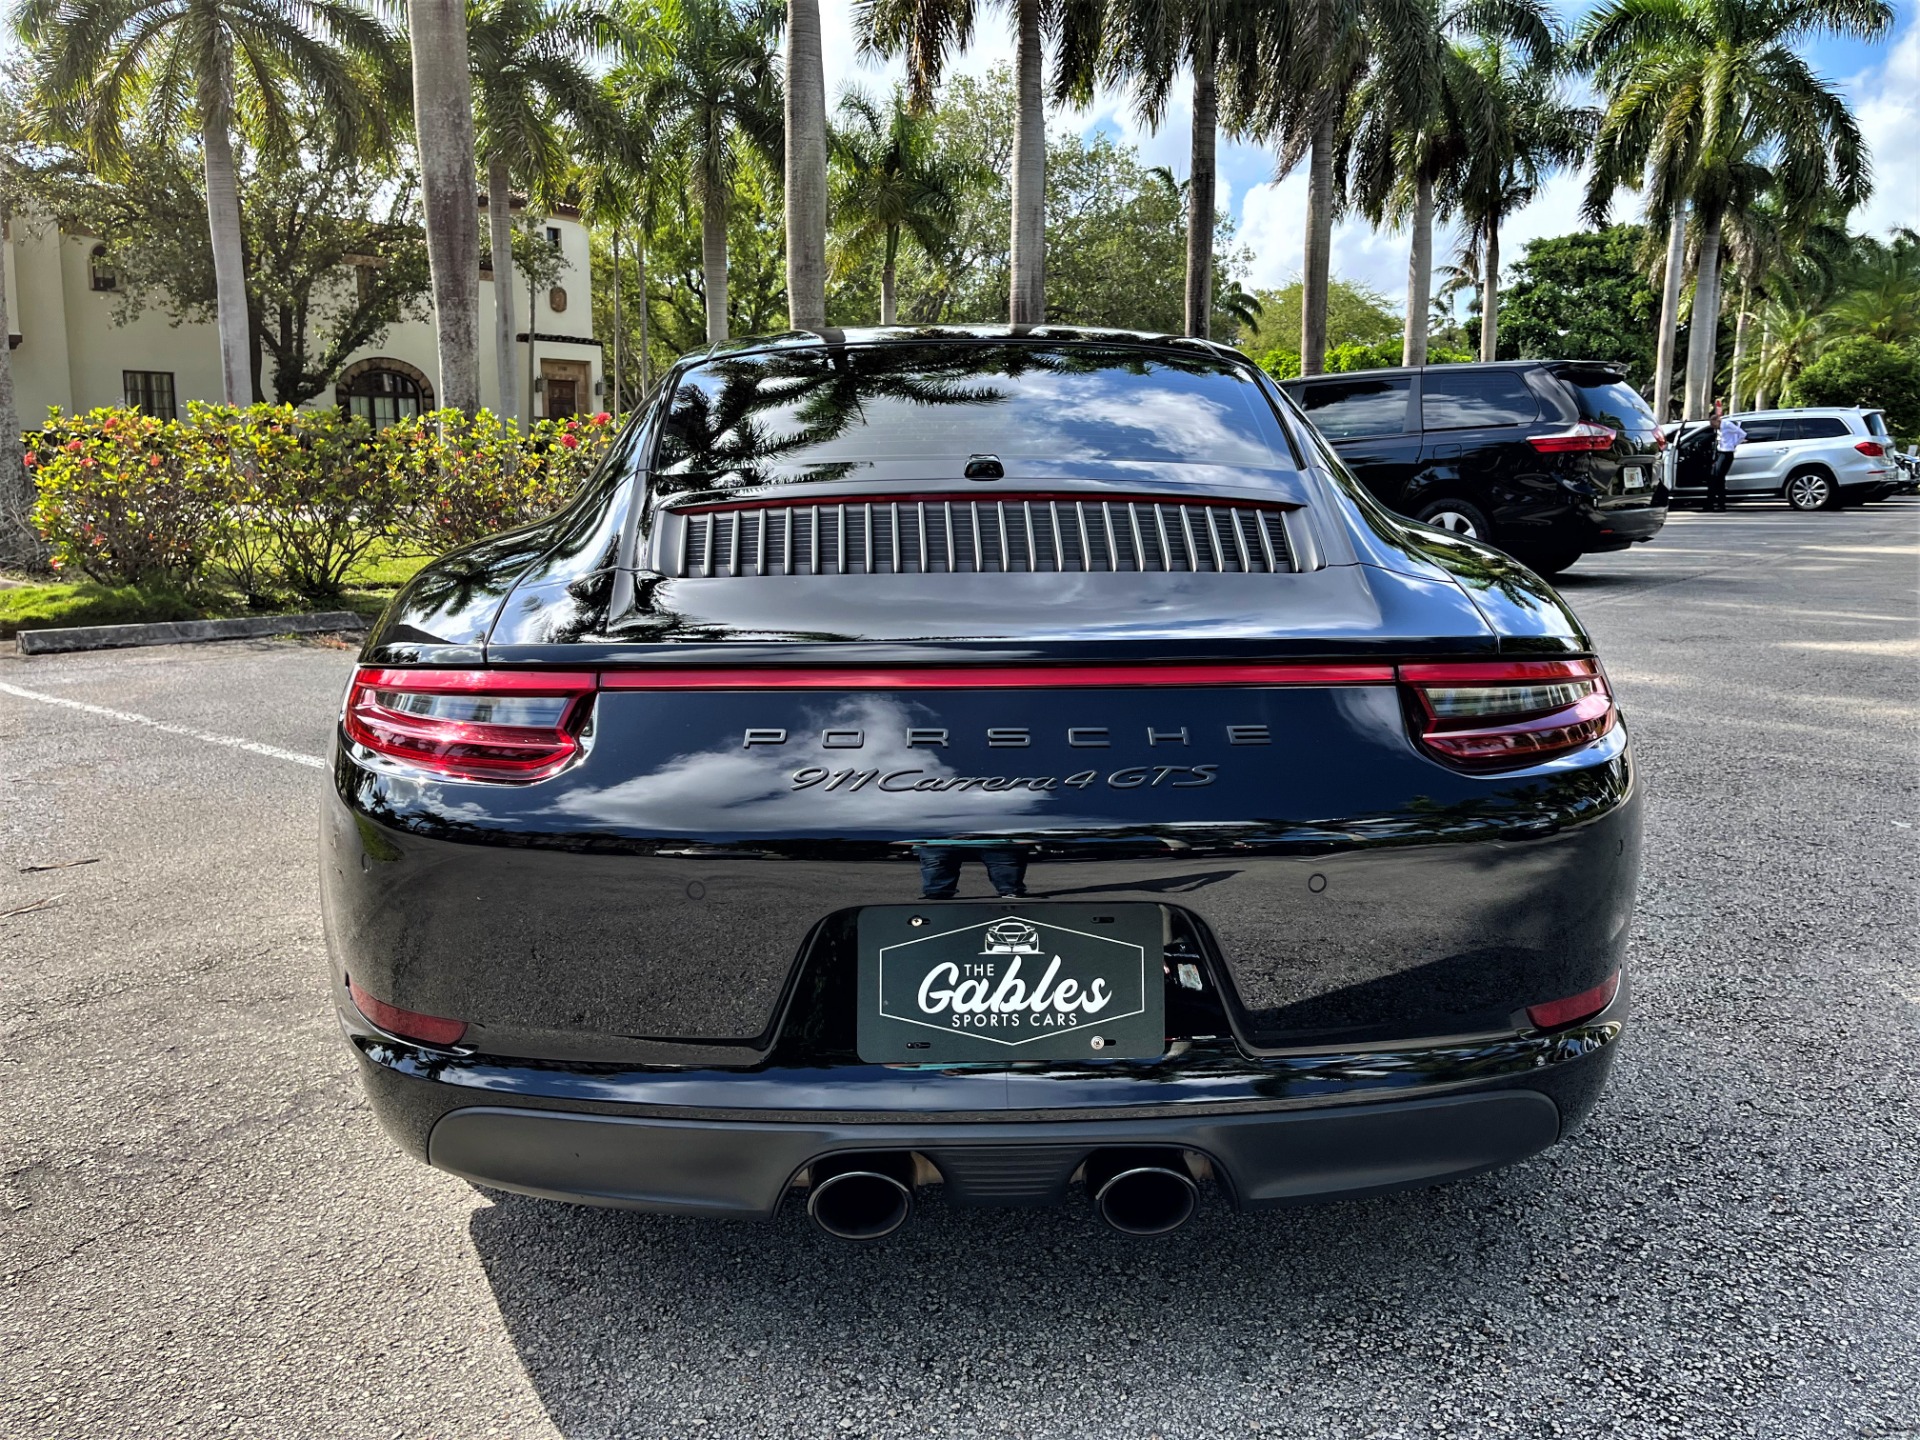 Used 2018 Porsche 911 Carrera 4 GTS for sale $146,850 at The Gables Sports Cars in Miami FL 33146 4